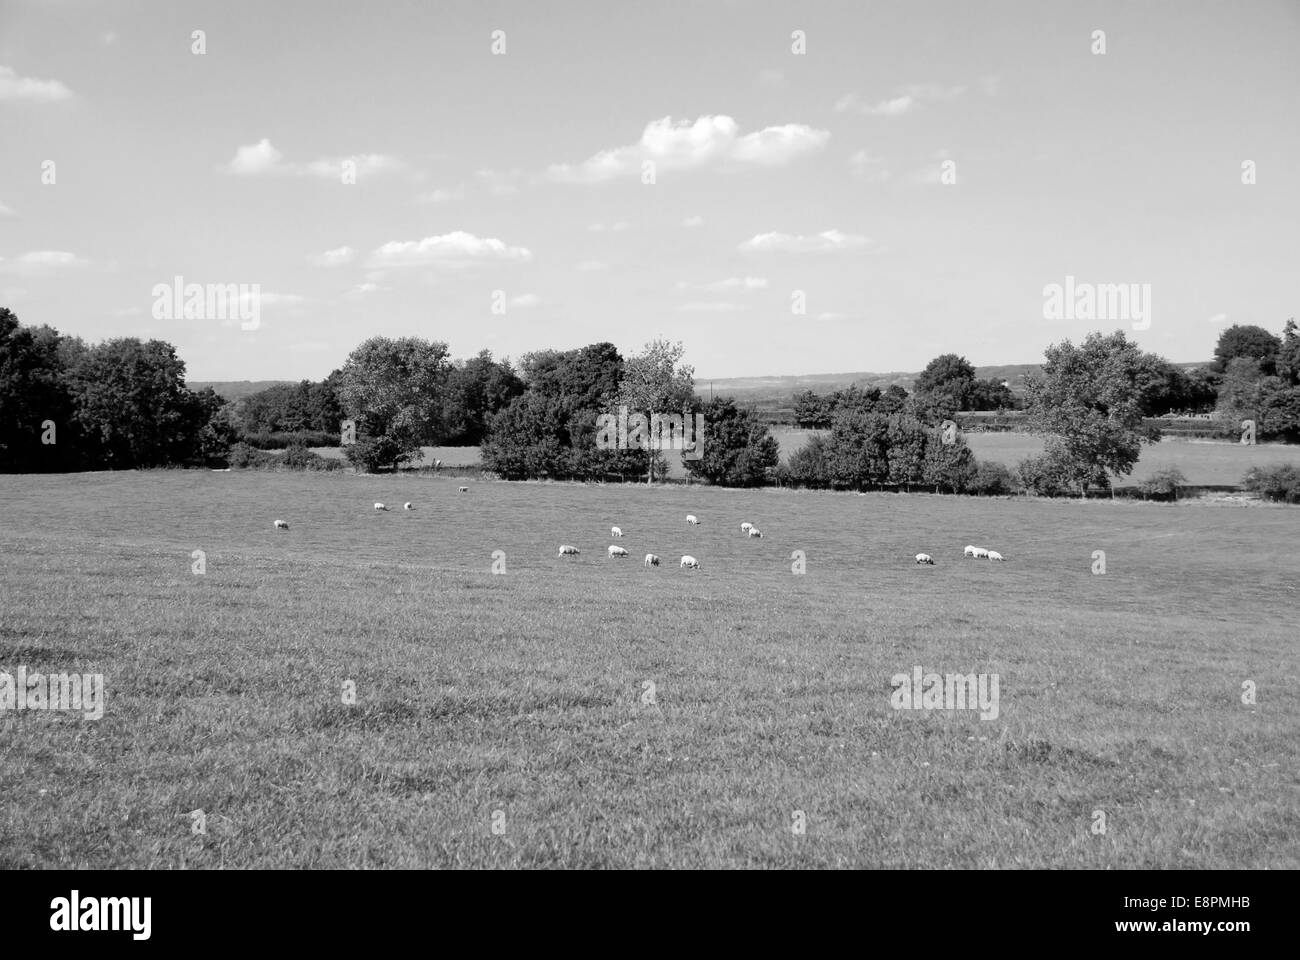 Flock of sheep grazing in the English countryside - monochrome processing Stock Photo